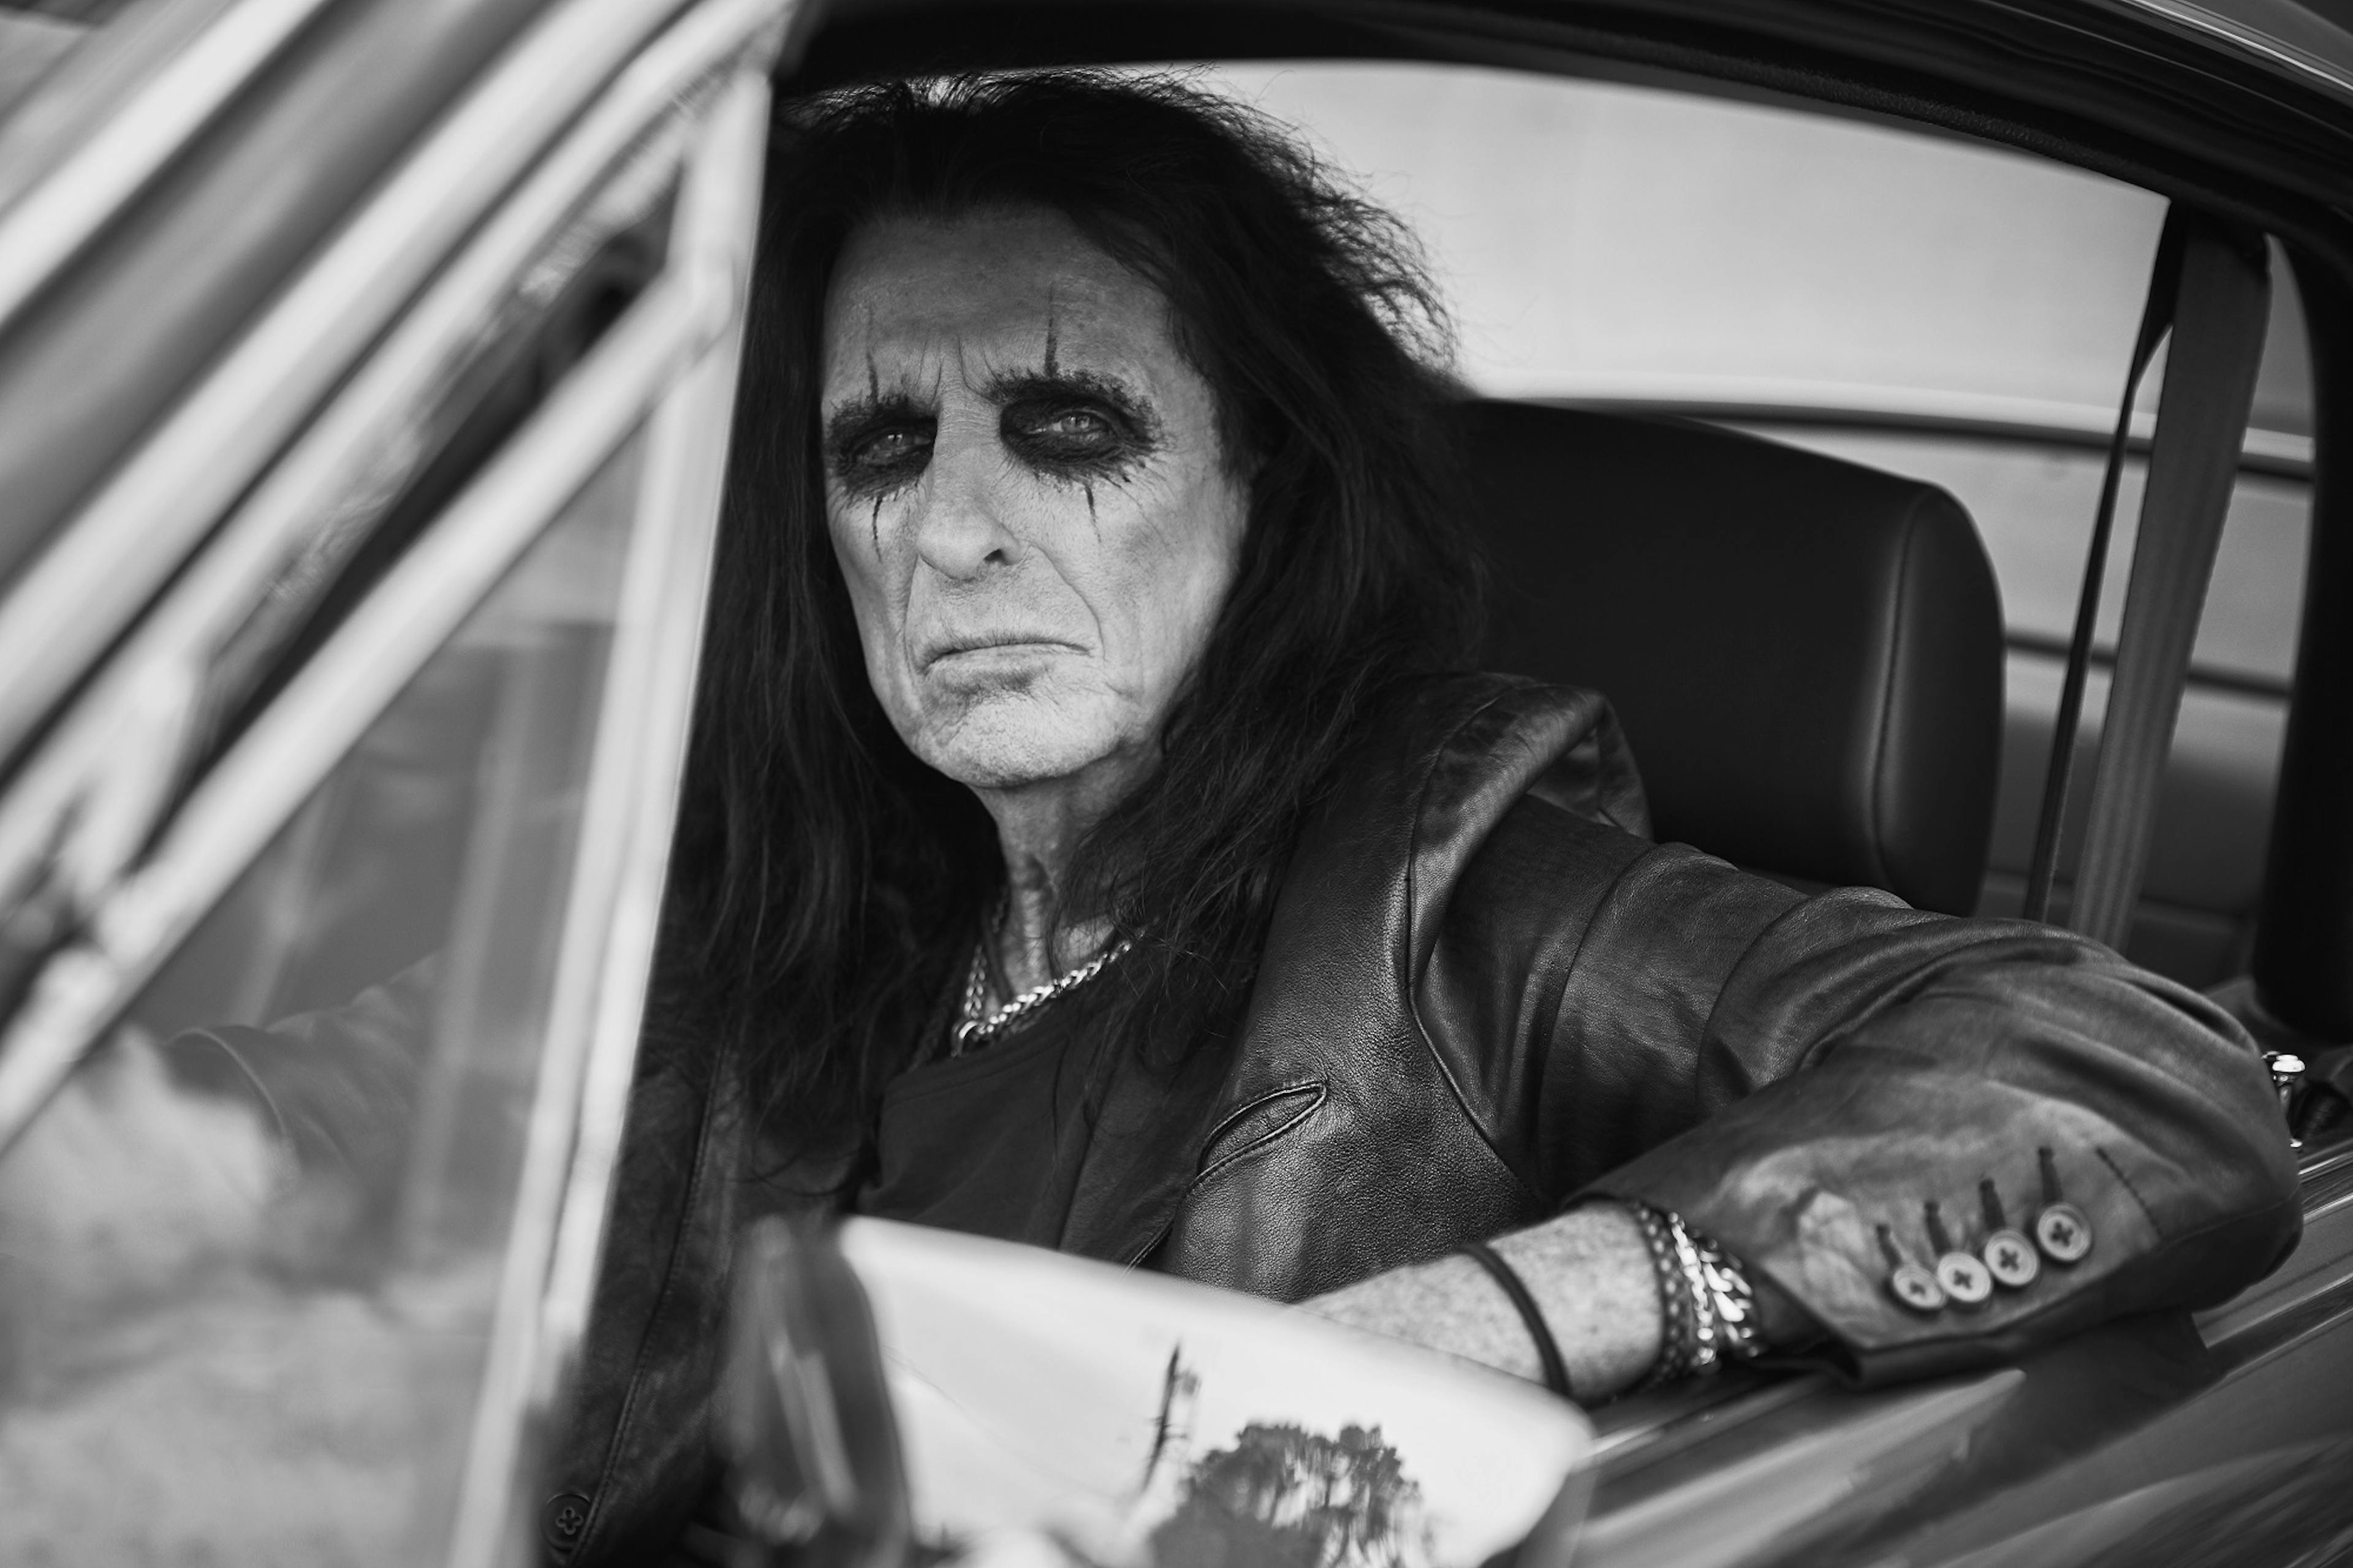 Alice Cooper and The Cult are heading on tour together